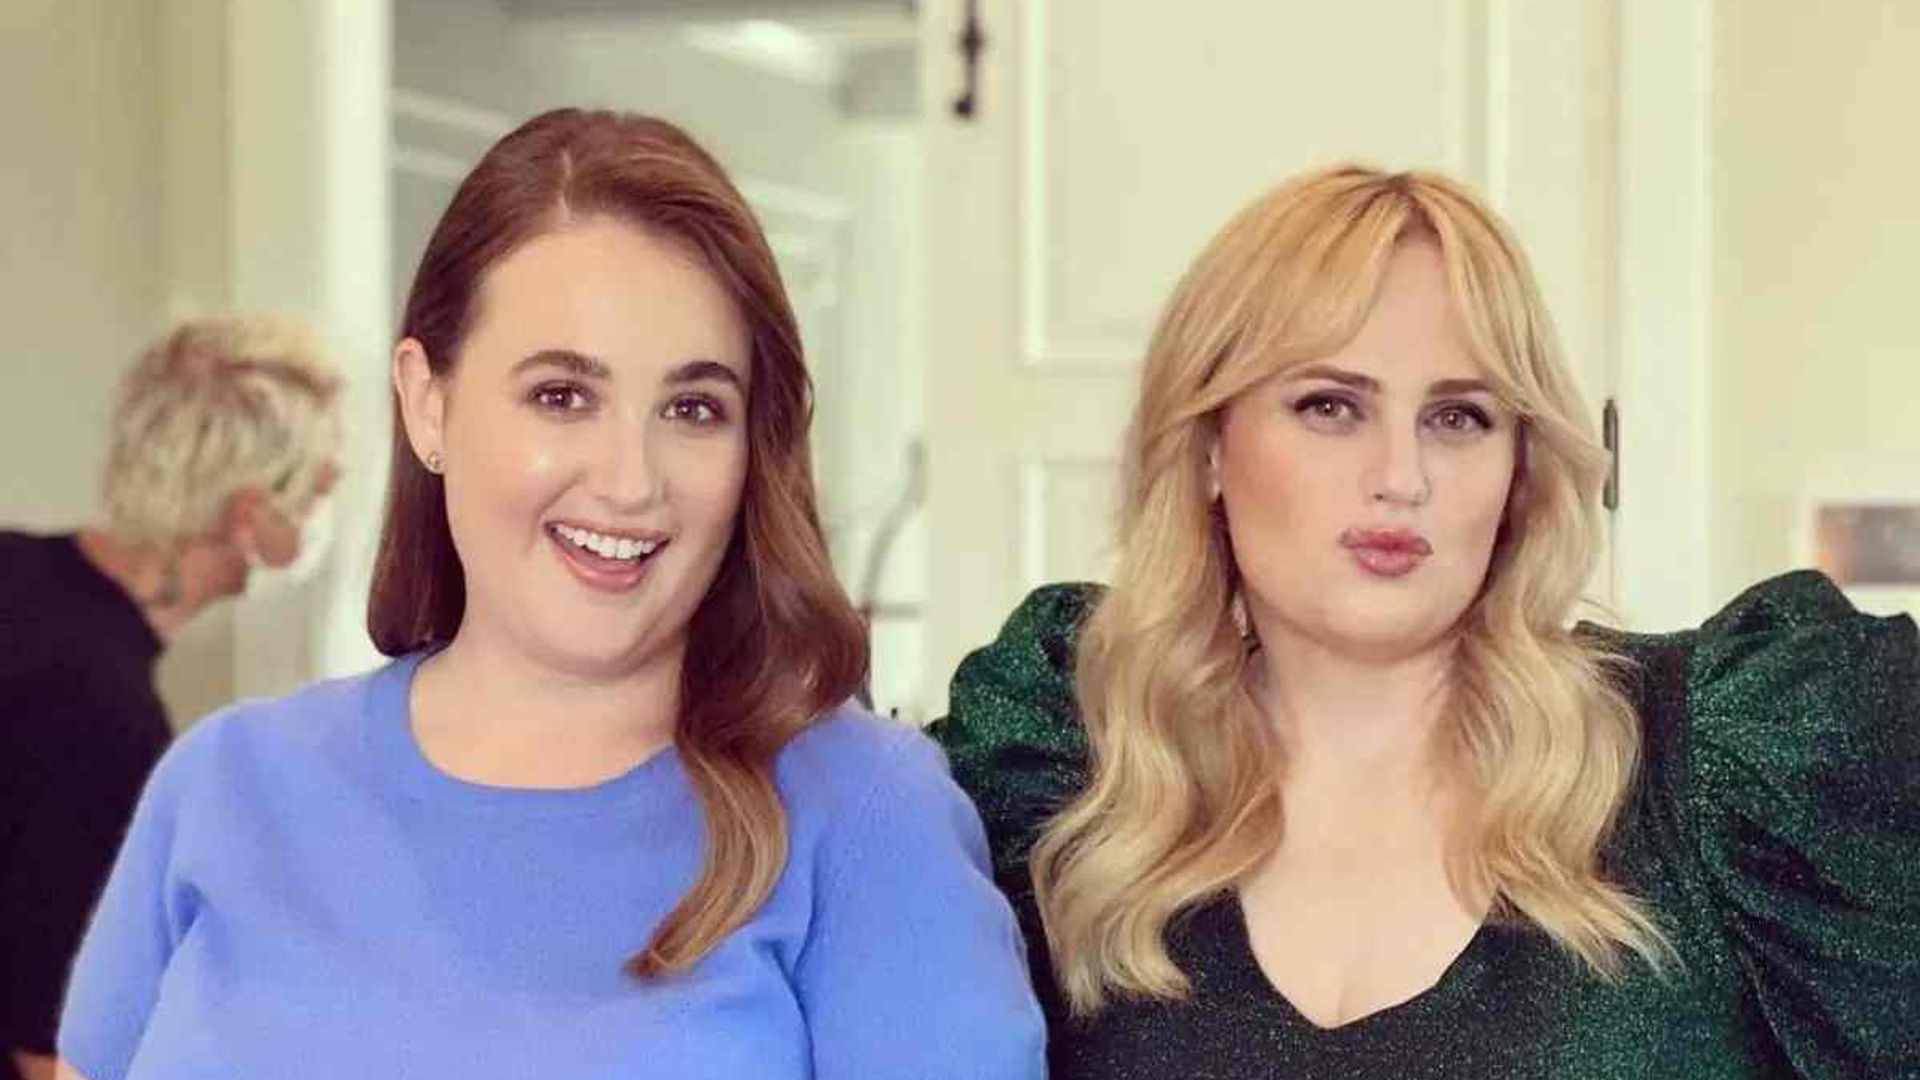 Rebel Wilson's younger sister is a beach babe in stunning selfie - and she looks so different